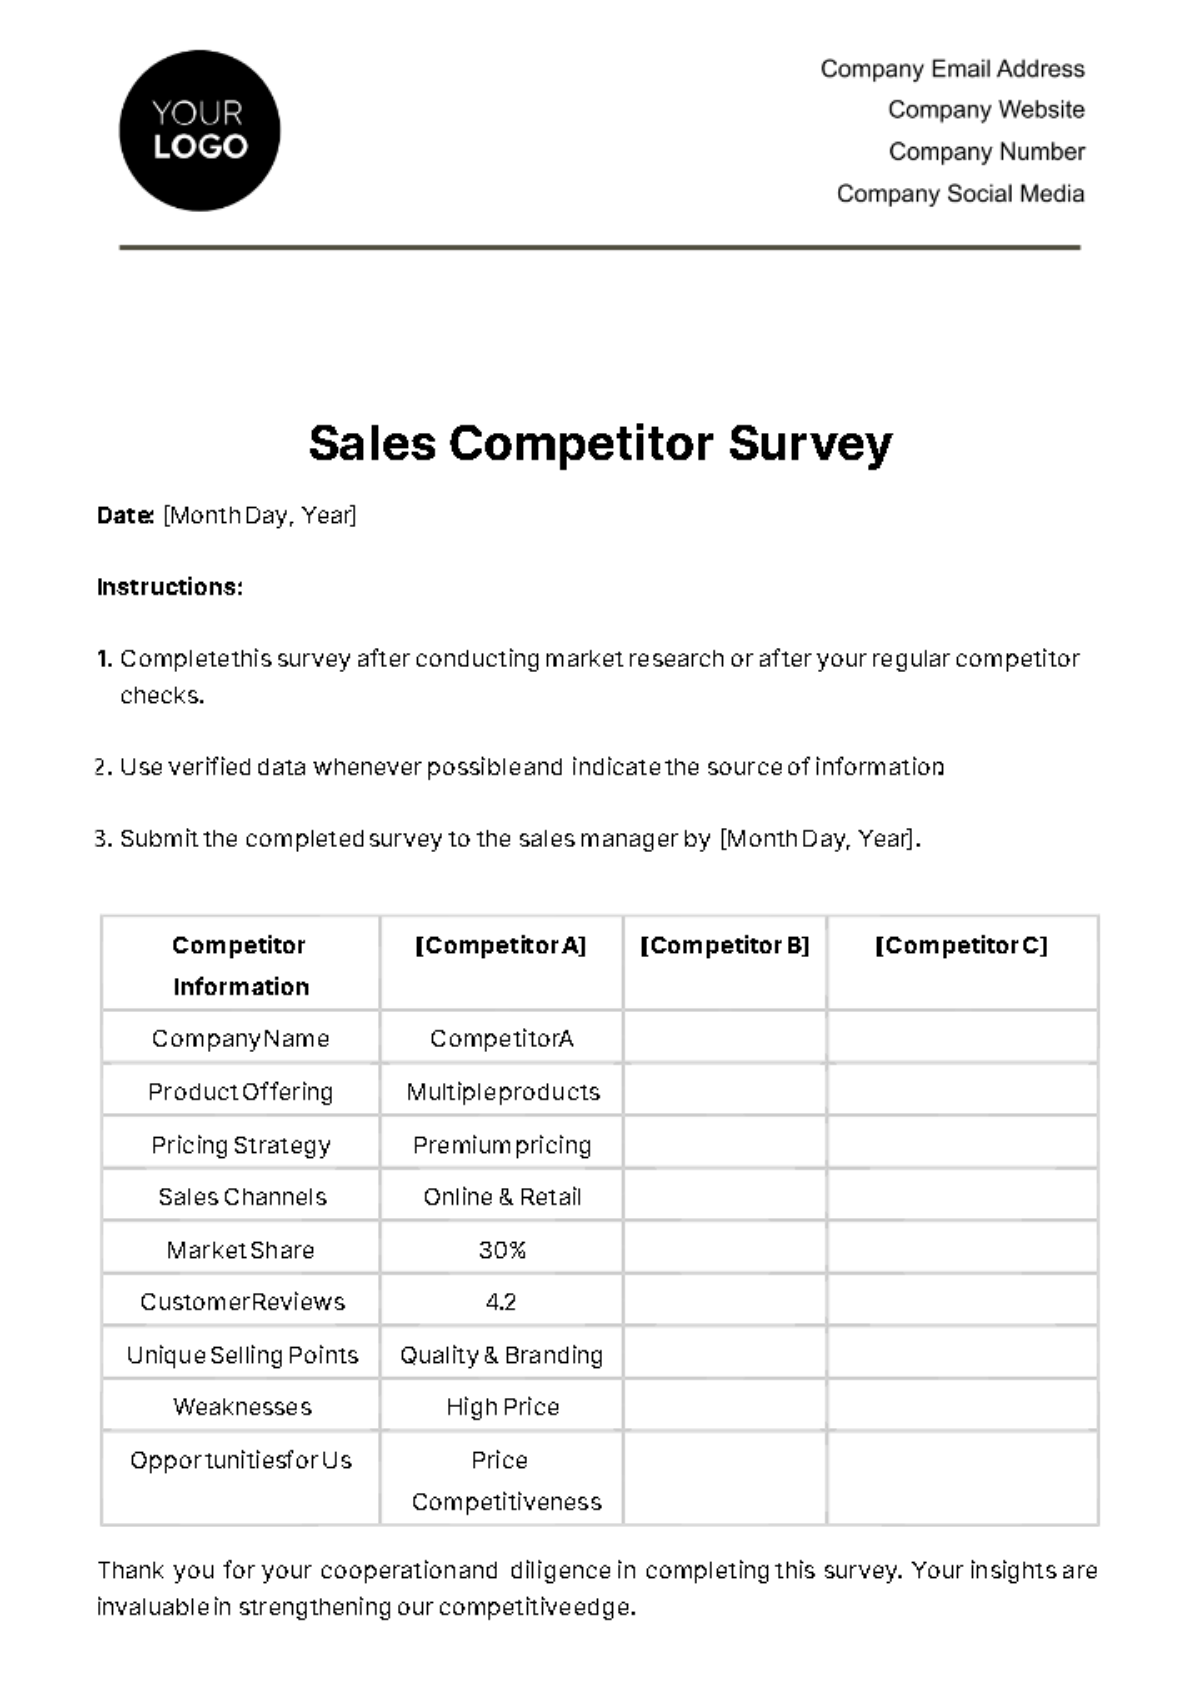 Free Sales Competitor Survey Template